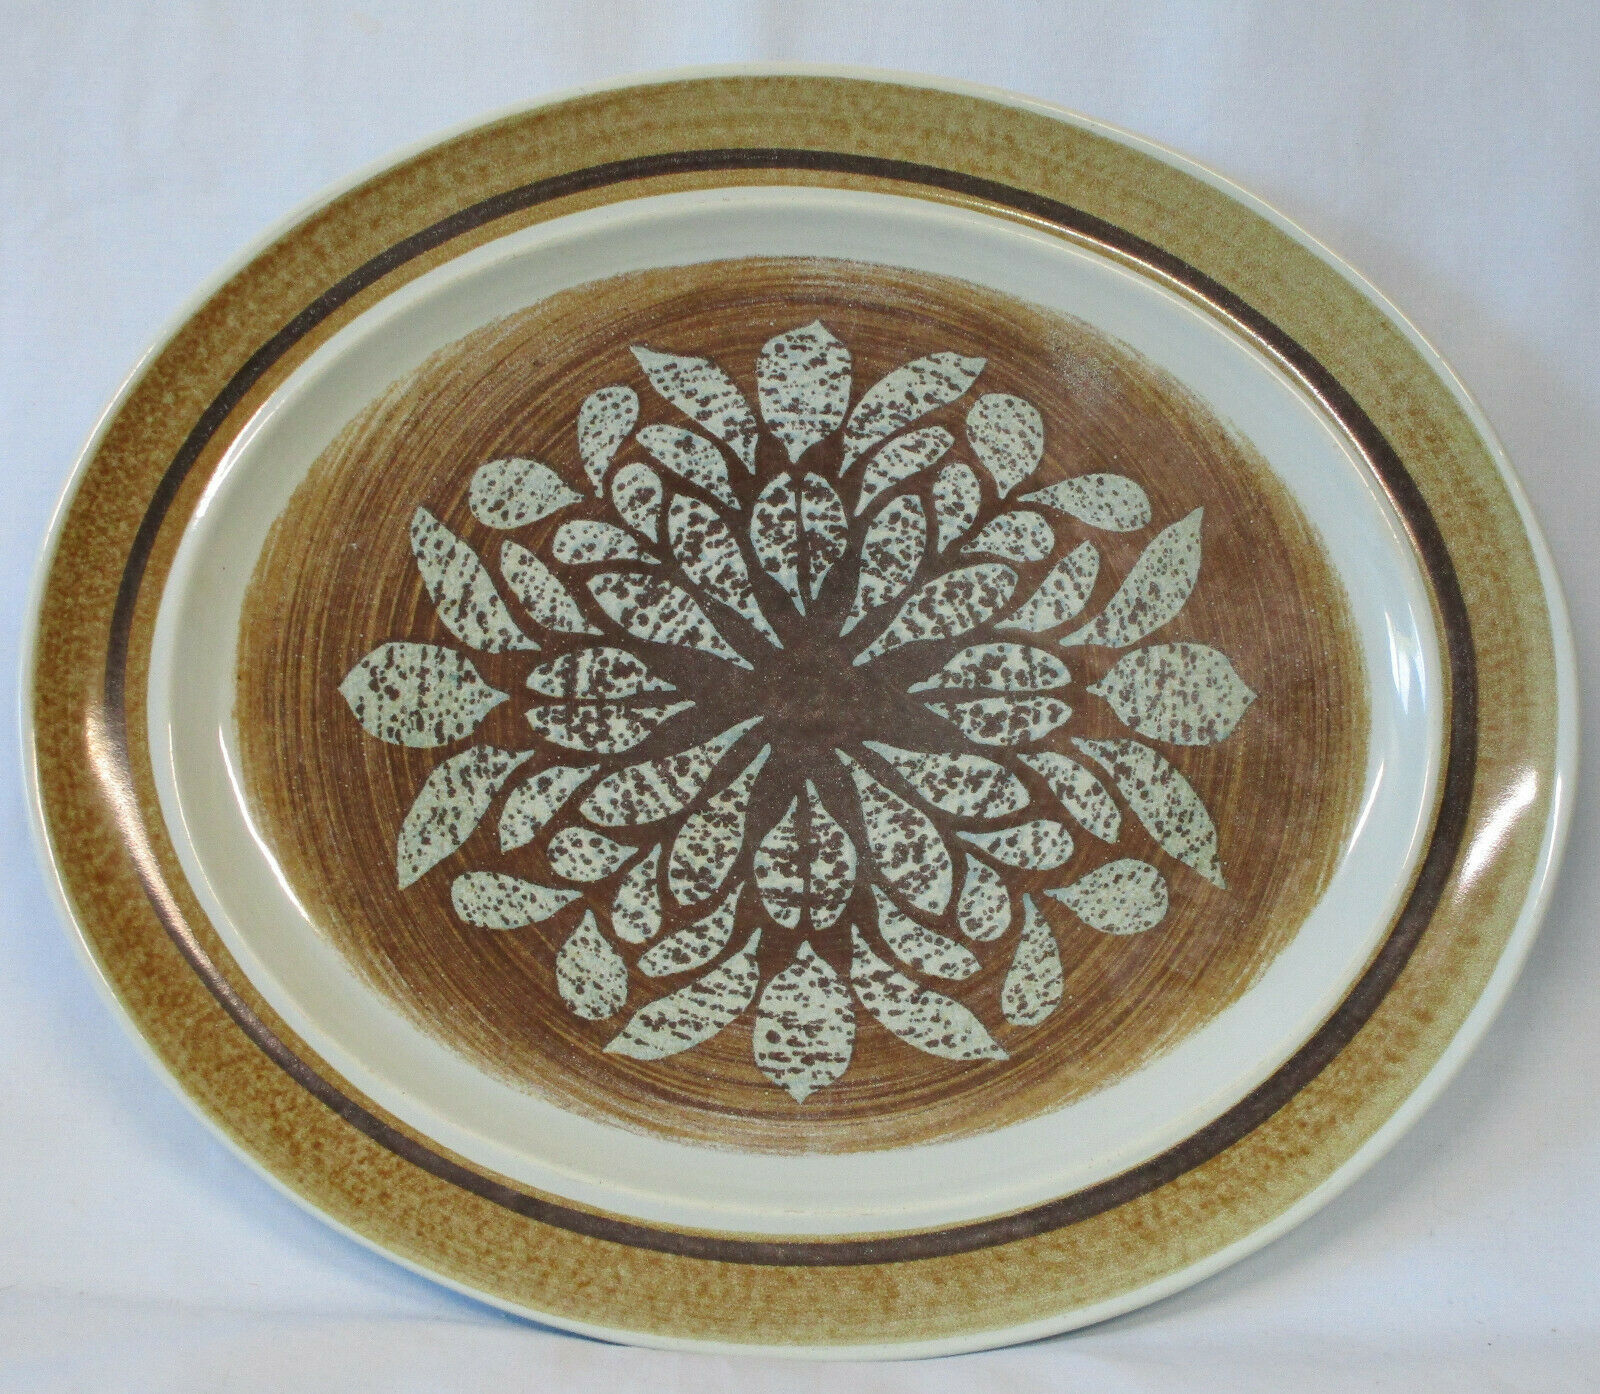 Primary image for Franciscan Nut Tree Oval Platter 13" by 11"